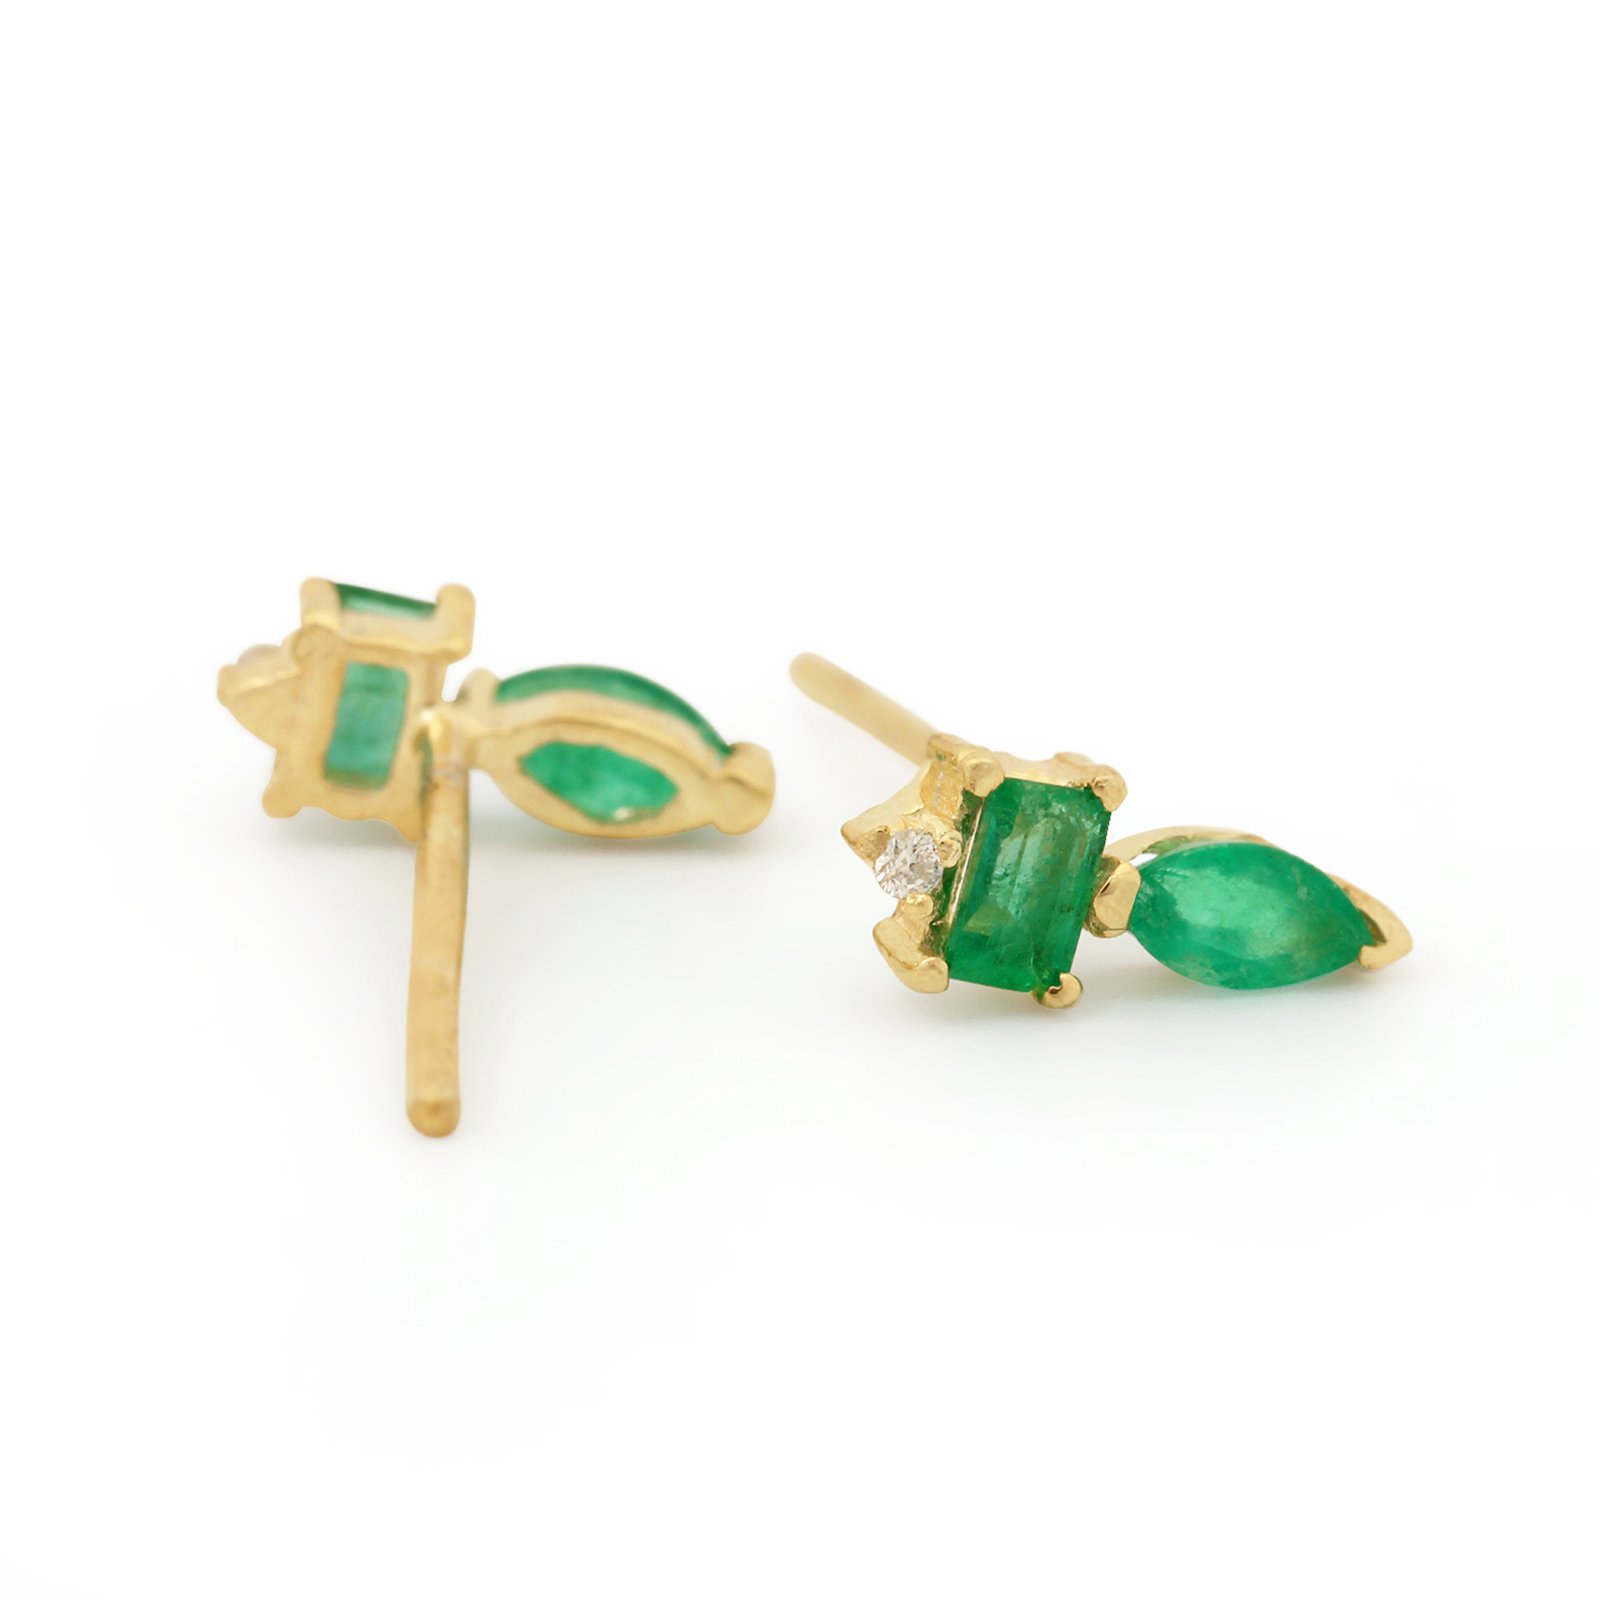 Solid 14k Gold Solitaire Stud Earrings Adorned With Diamond & Emerald